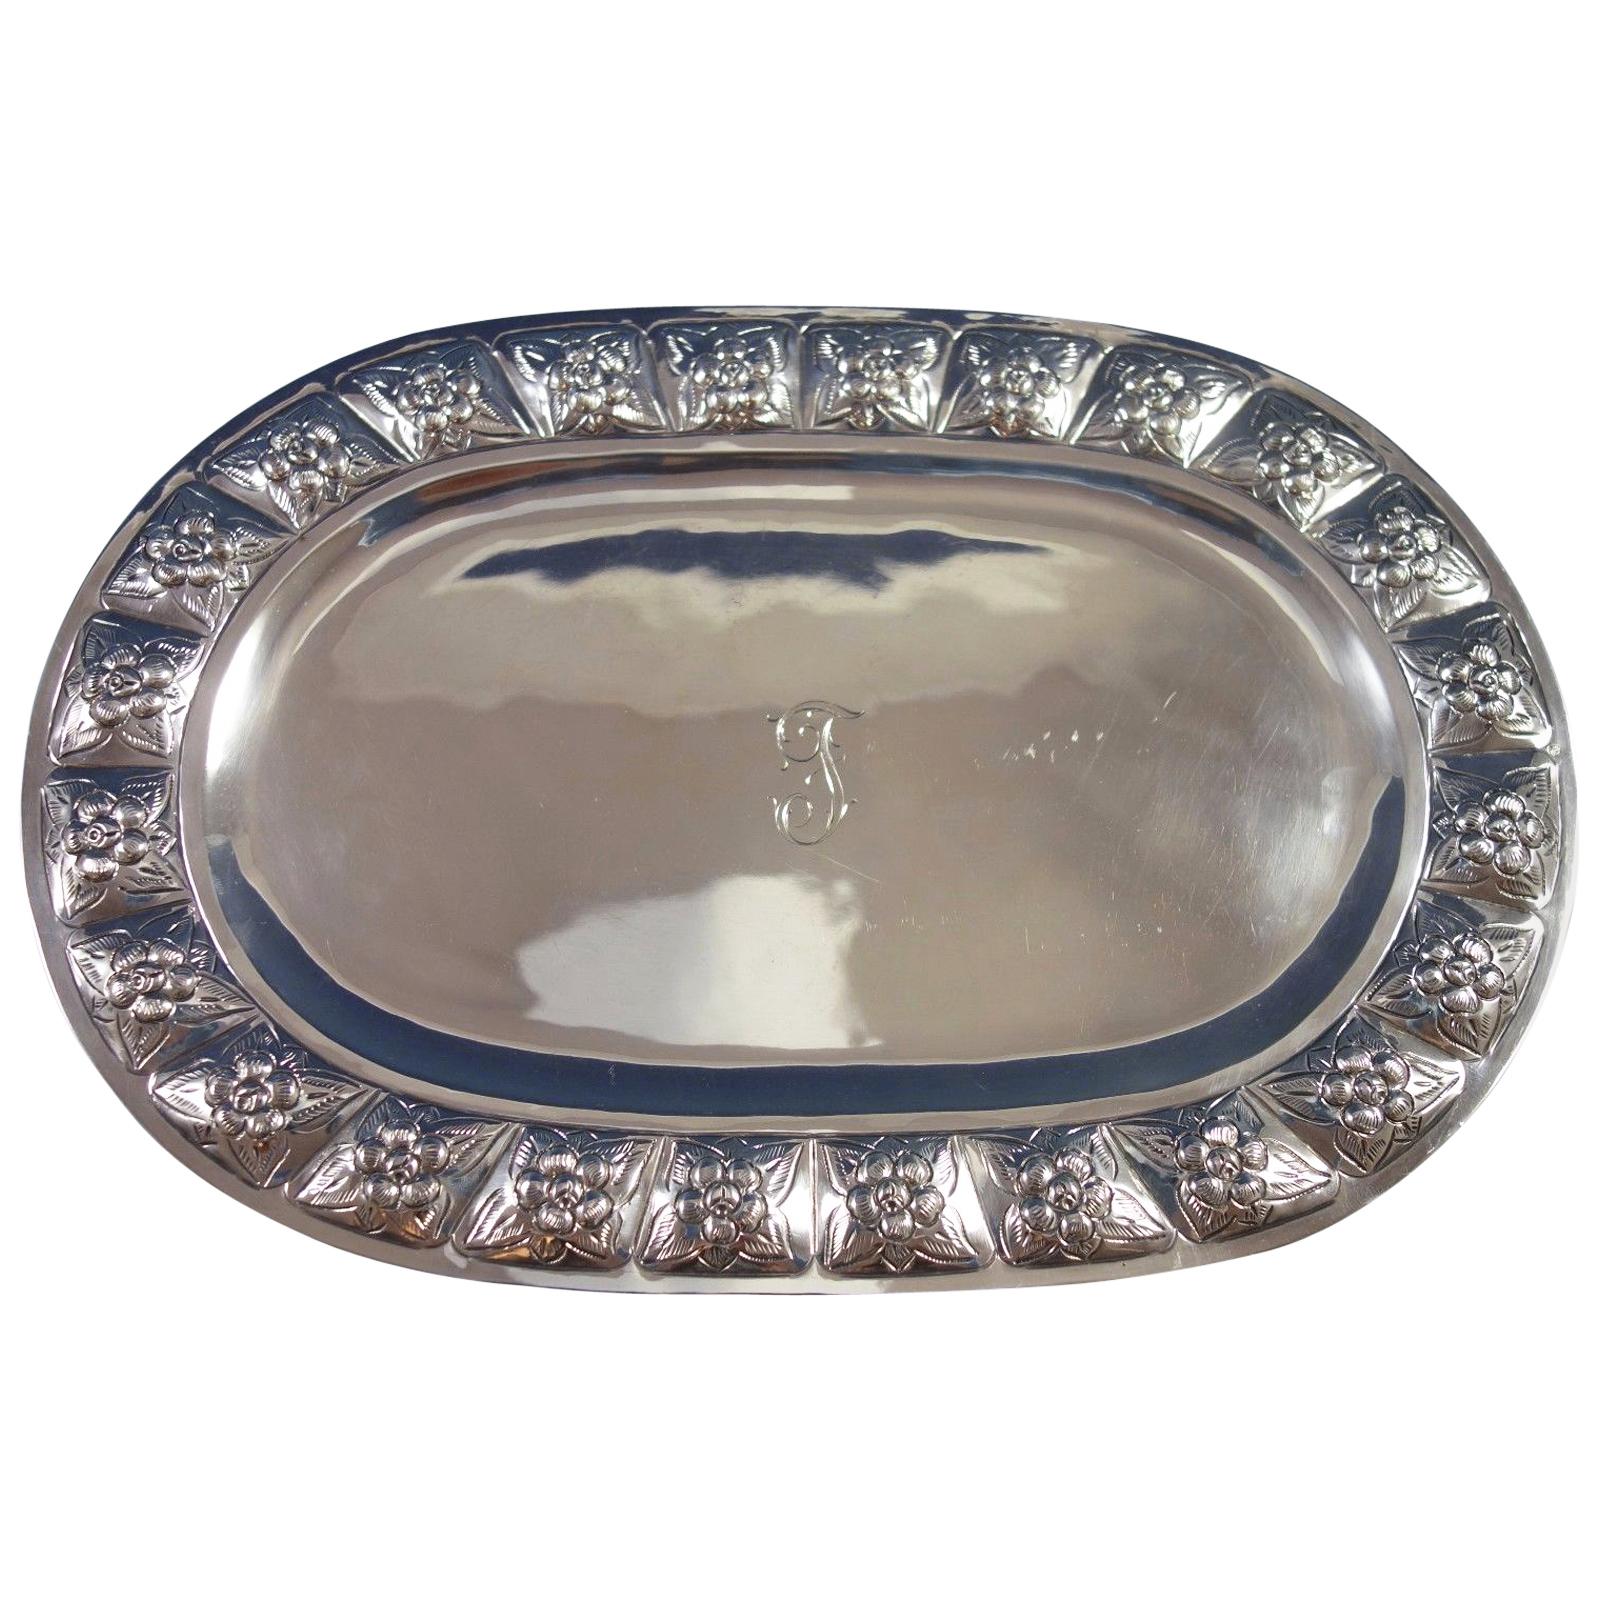 Aztec Rose by Sanborns Mexican Sterling Silver Bread Tray Oval